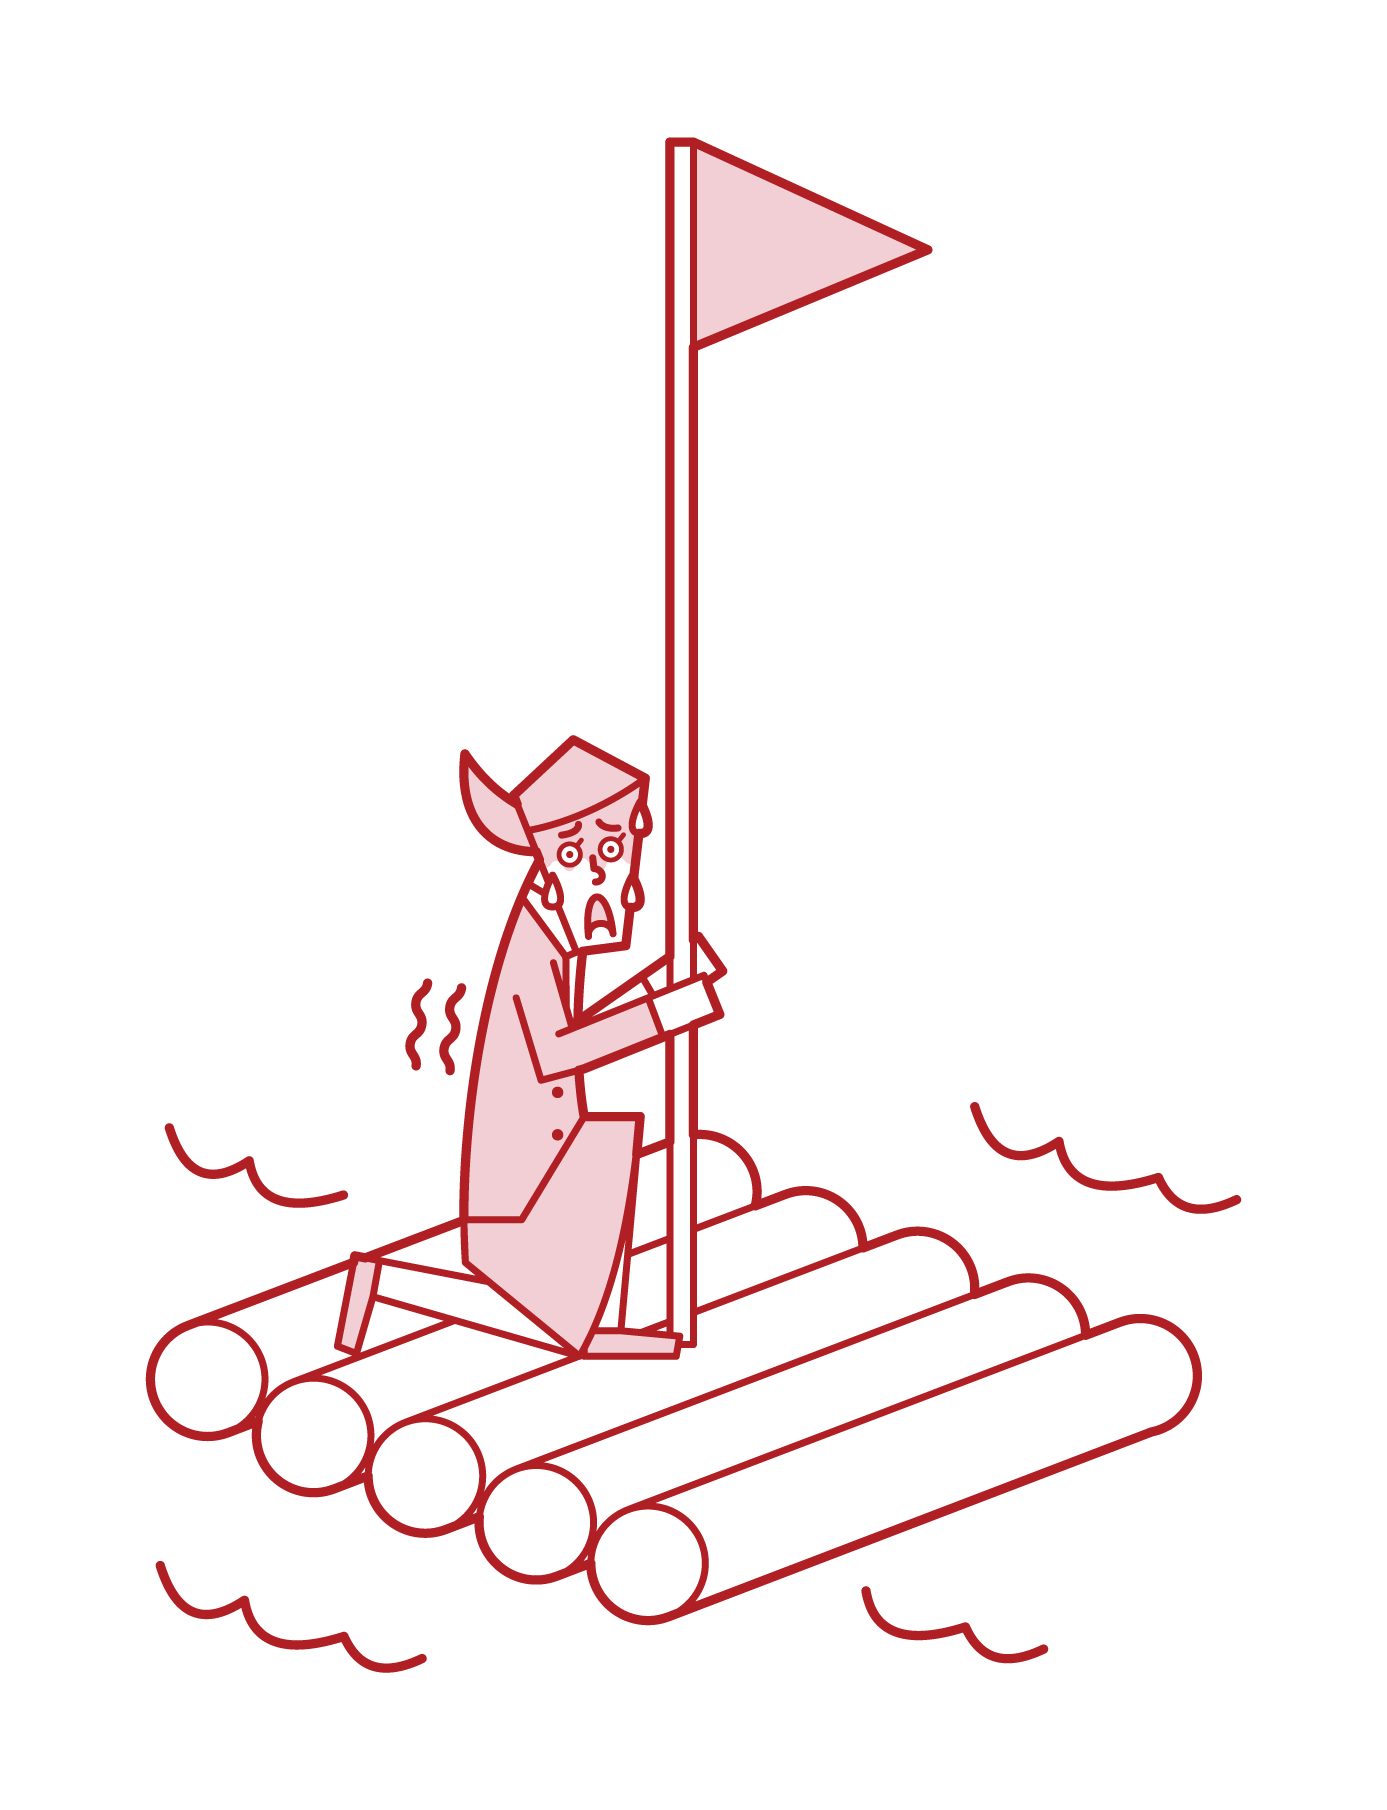 Illustration of a frightened person (woman) on a raft